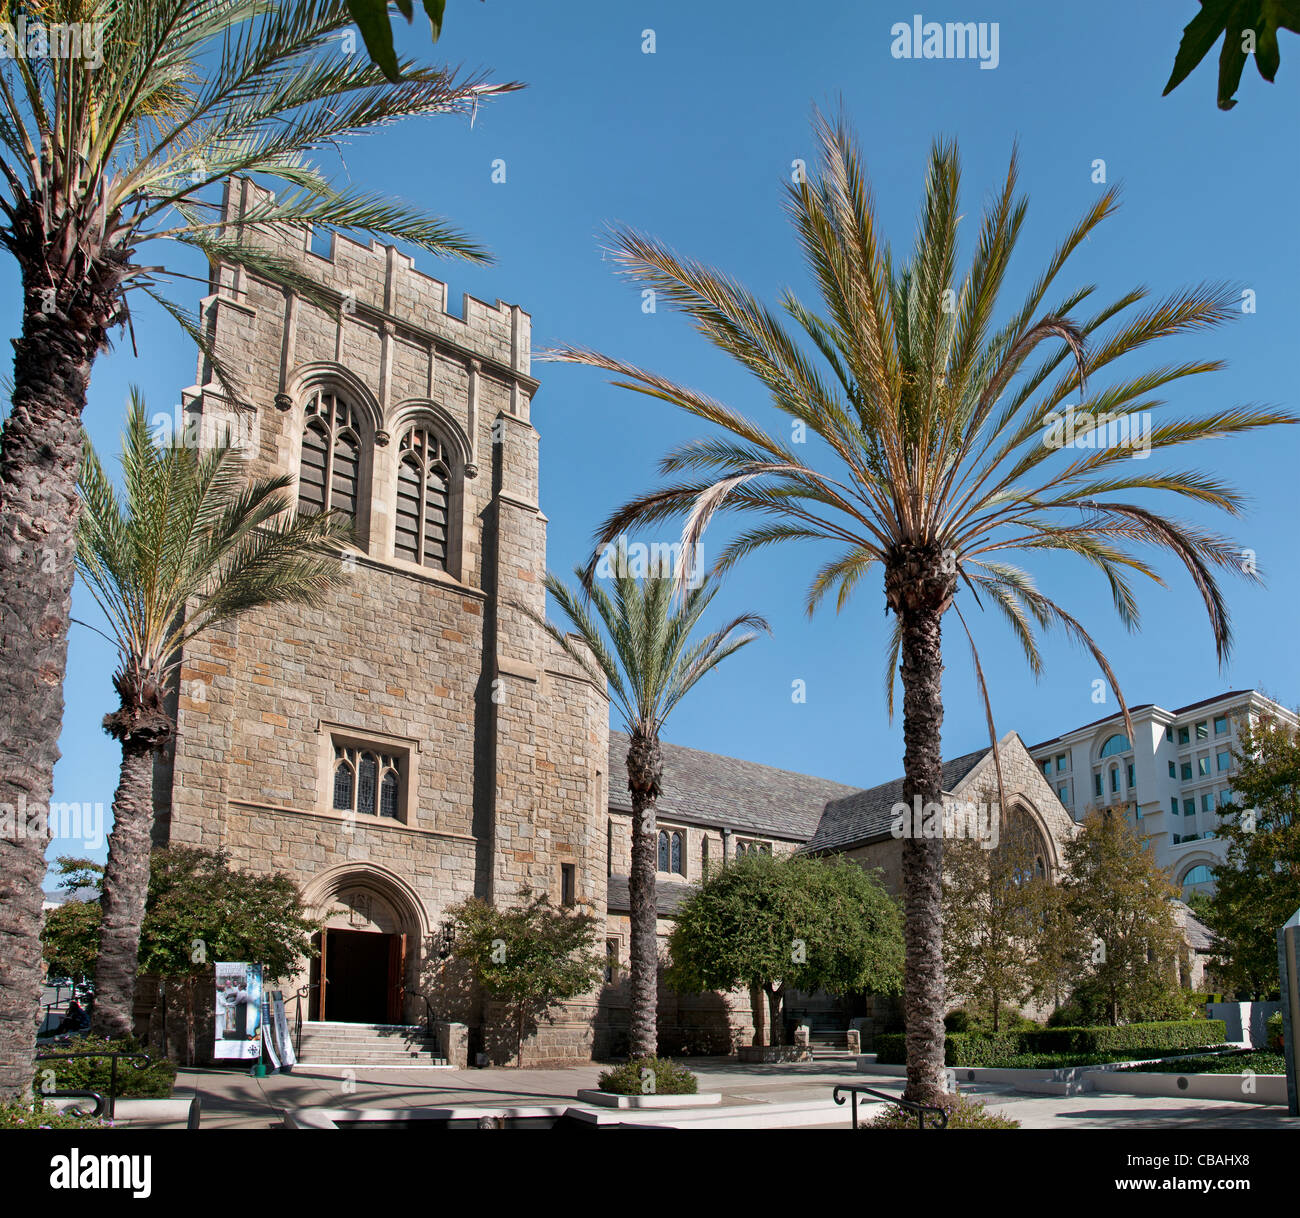 All Saints Church Pasadena California United States of America USA Américain Town City Los Angeles Banque D'Images